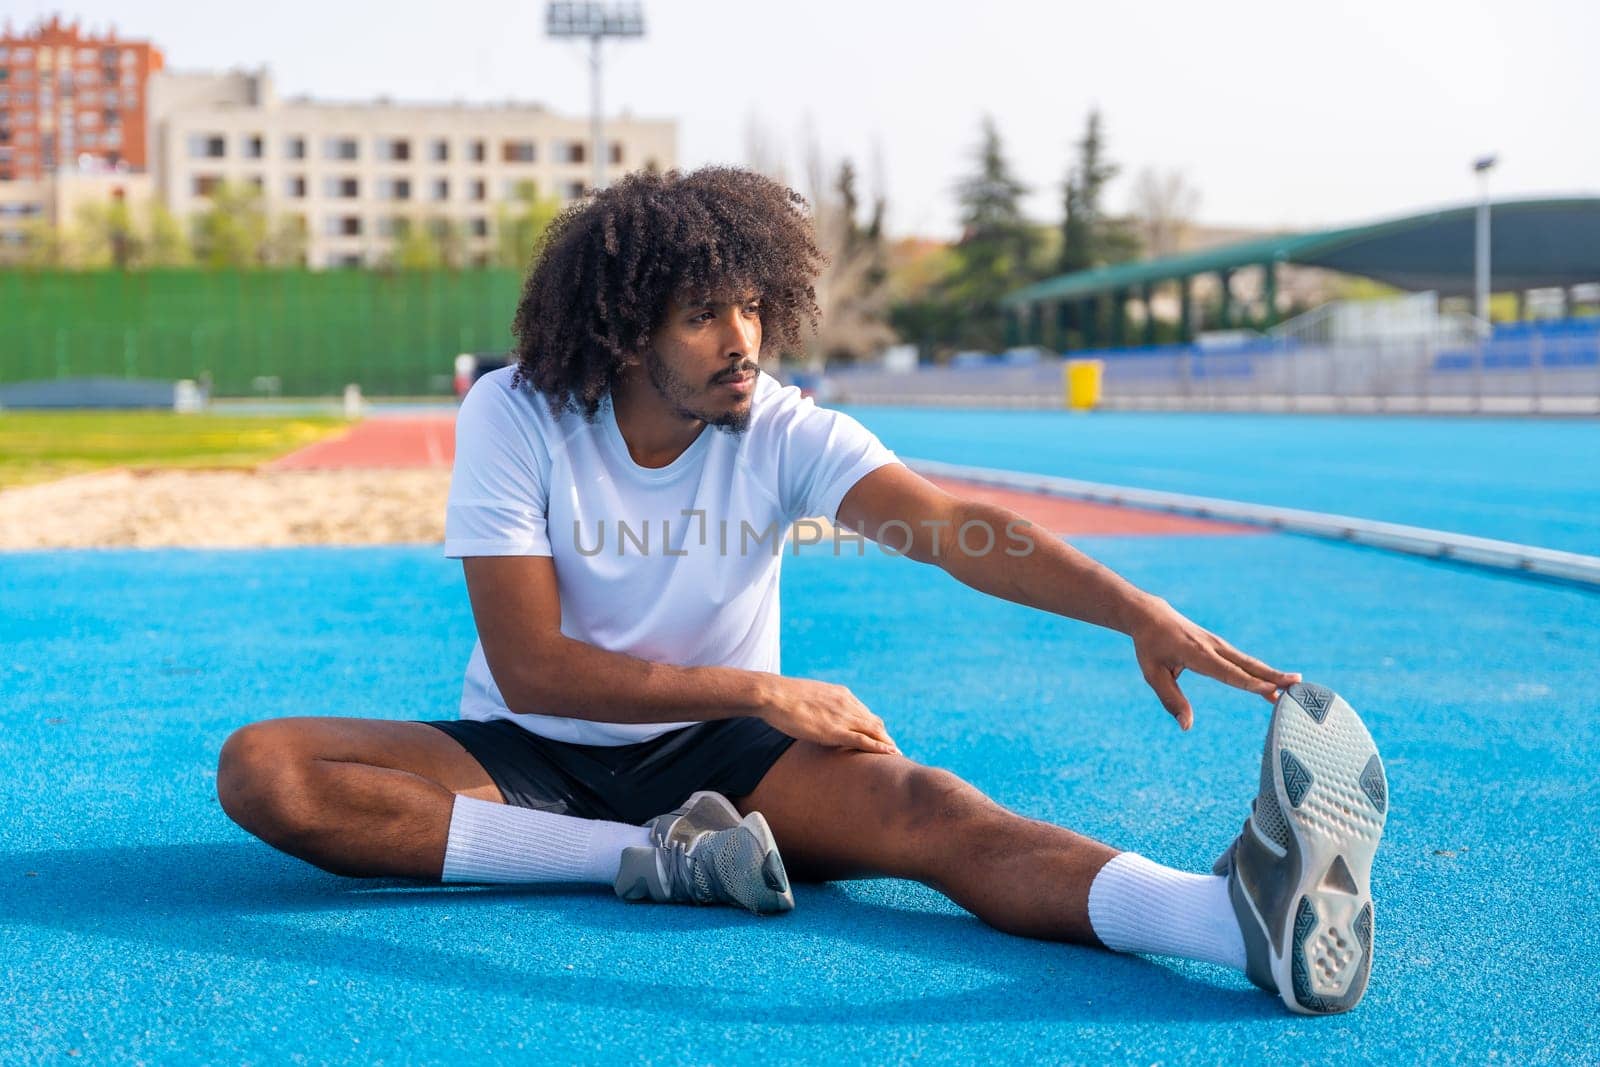 Man with african hairstyle stretching in a running track by Huizi